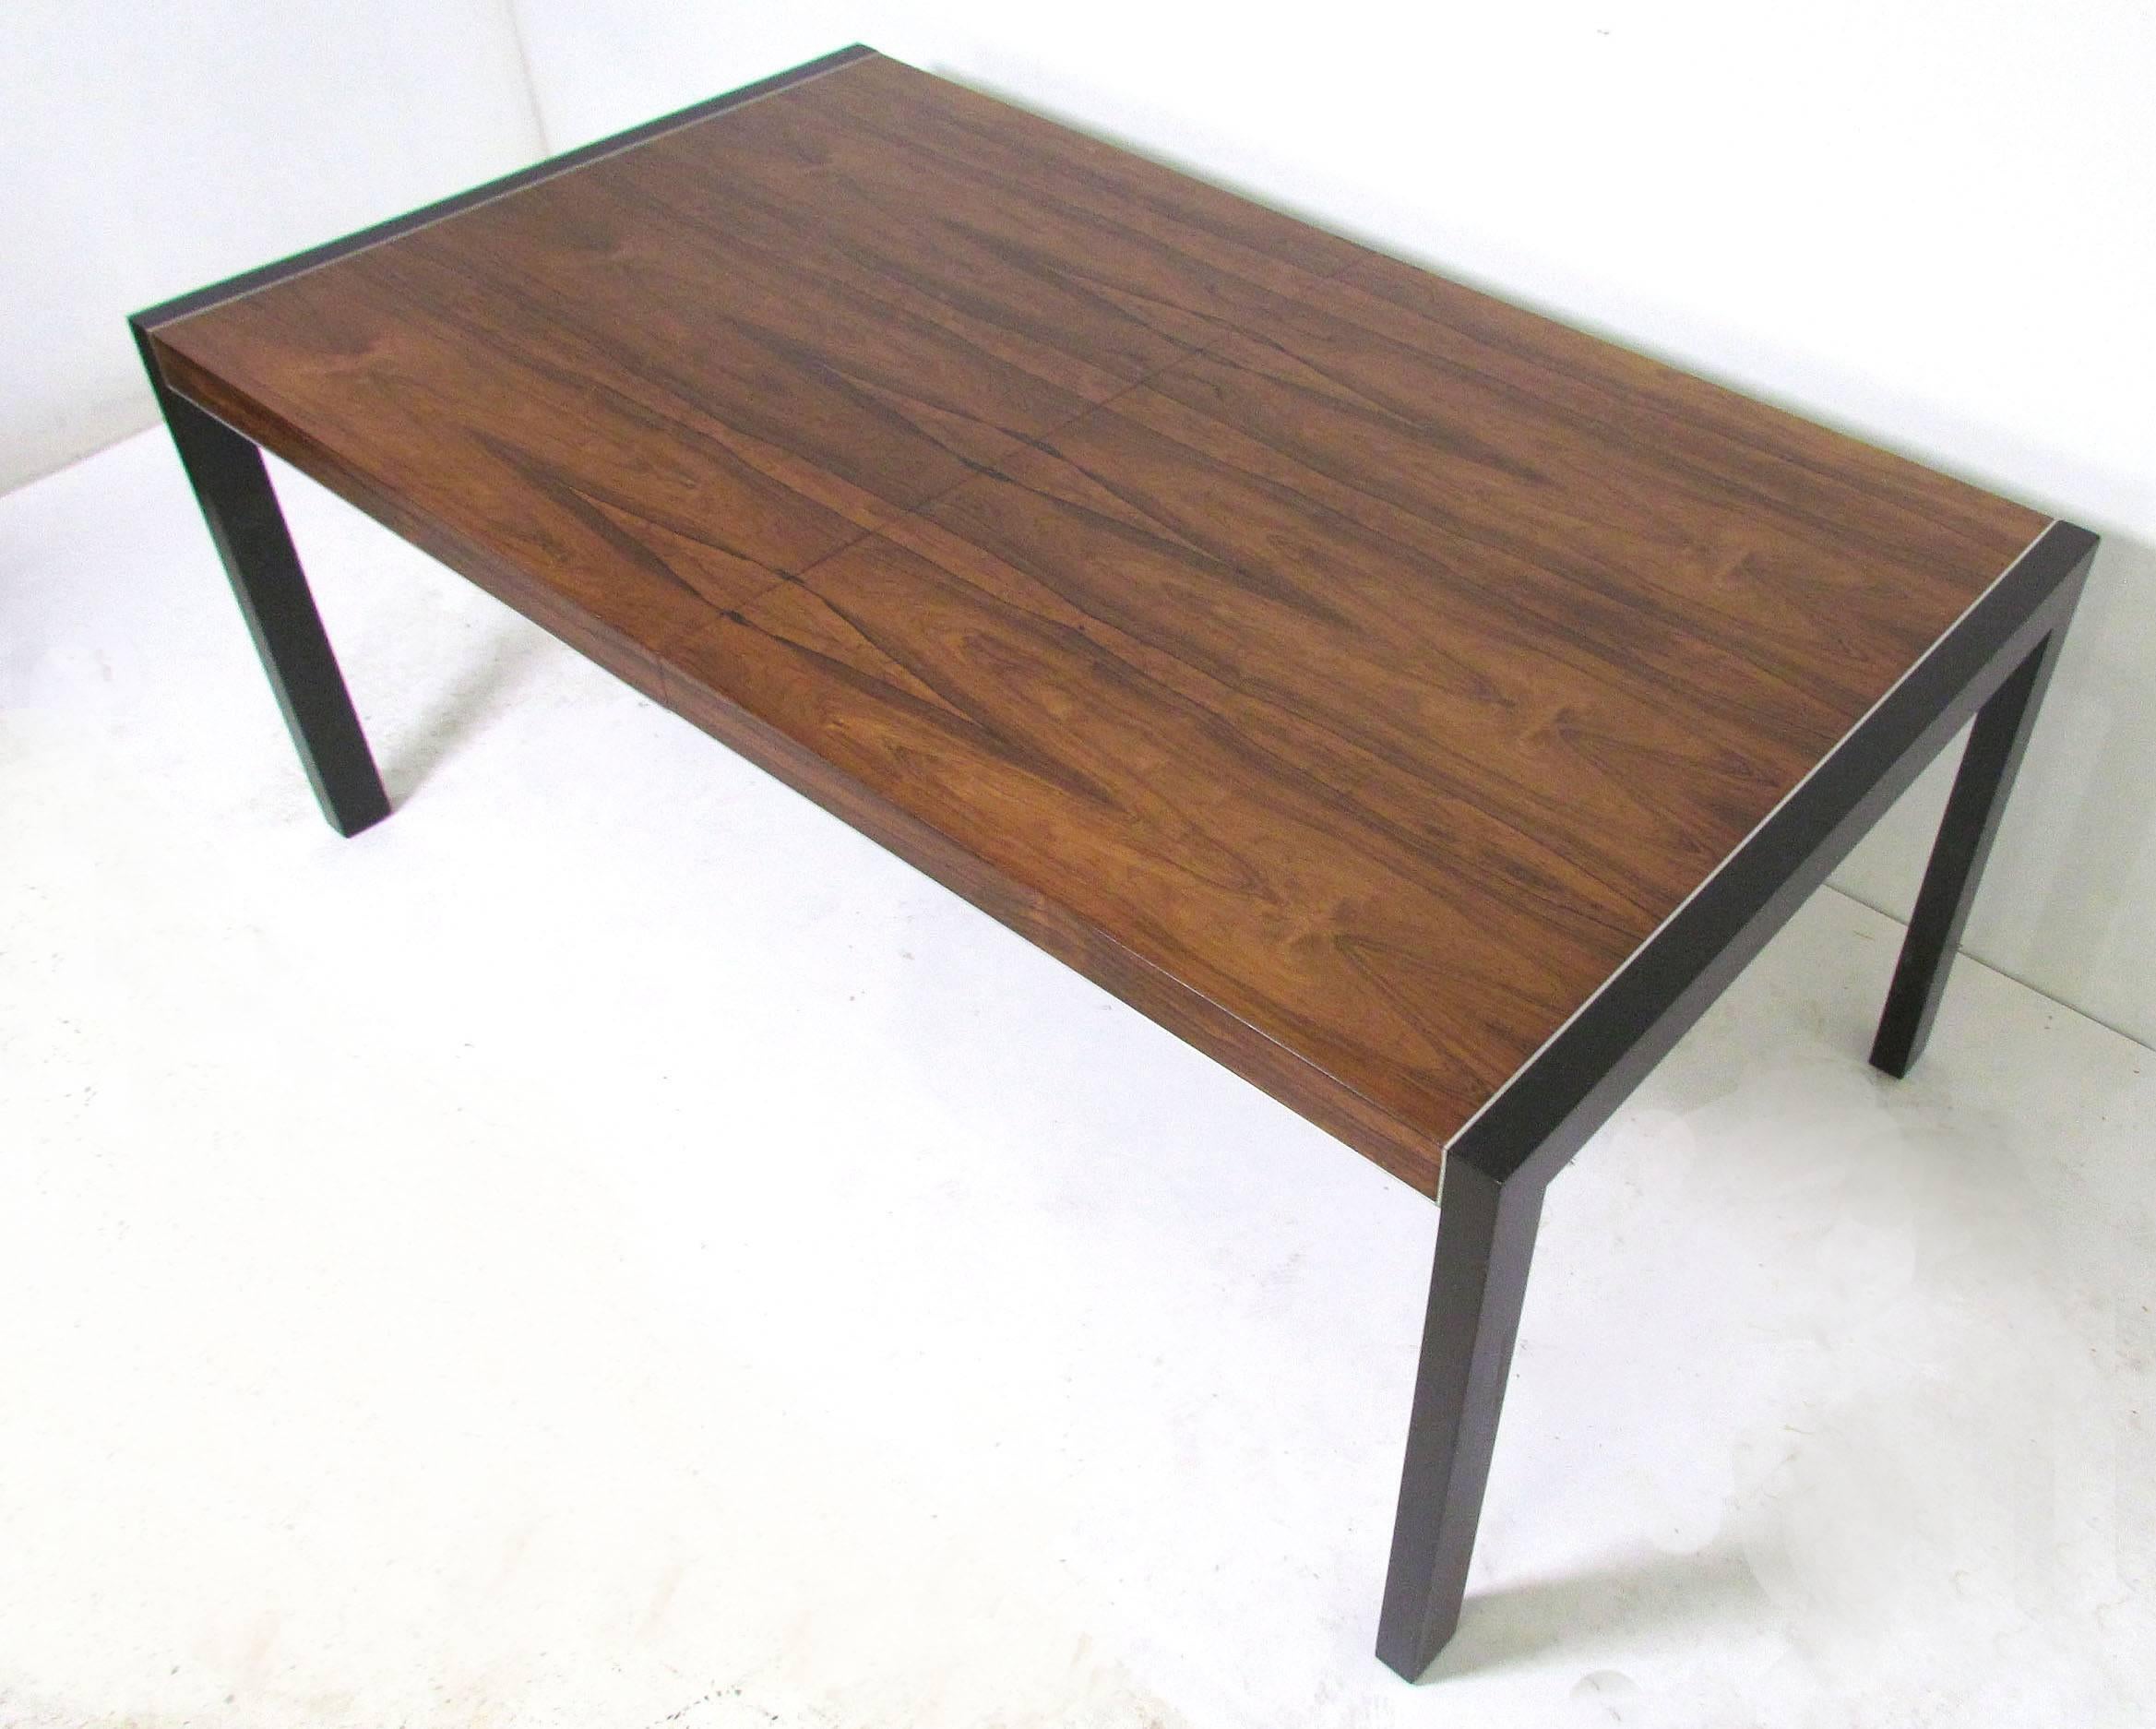 Mid-Century rosewood dining table with ebonized legs and aluminium trim, designed by Robert Baron for Glenn of California, circa 1960s. Includes two bookmatched 20